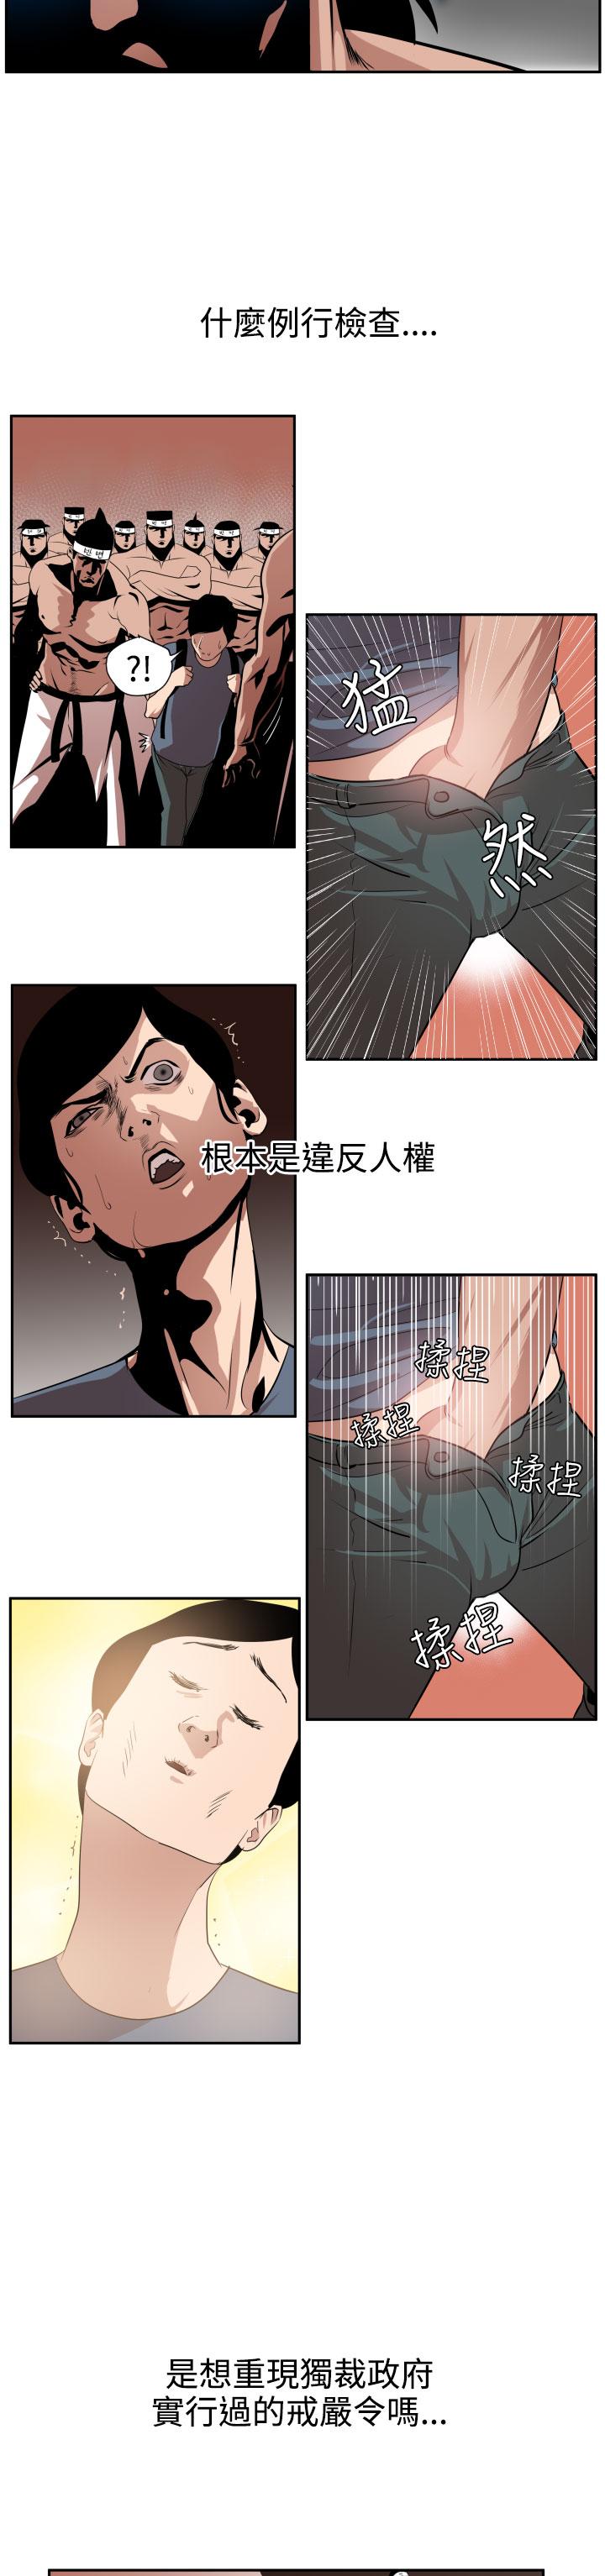 Desire King (慾求王) Ch.1-16 (chinese) 327